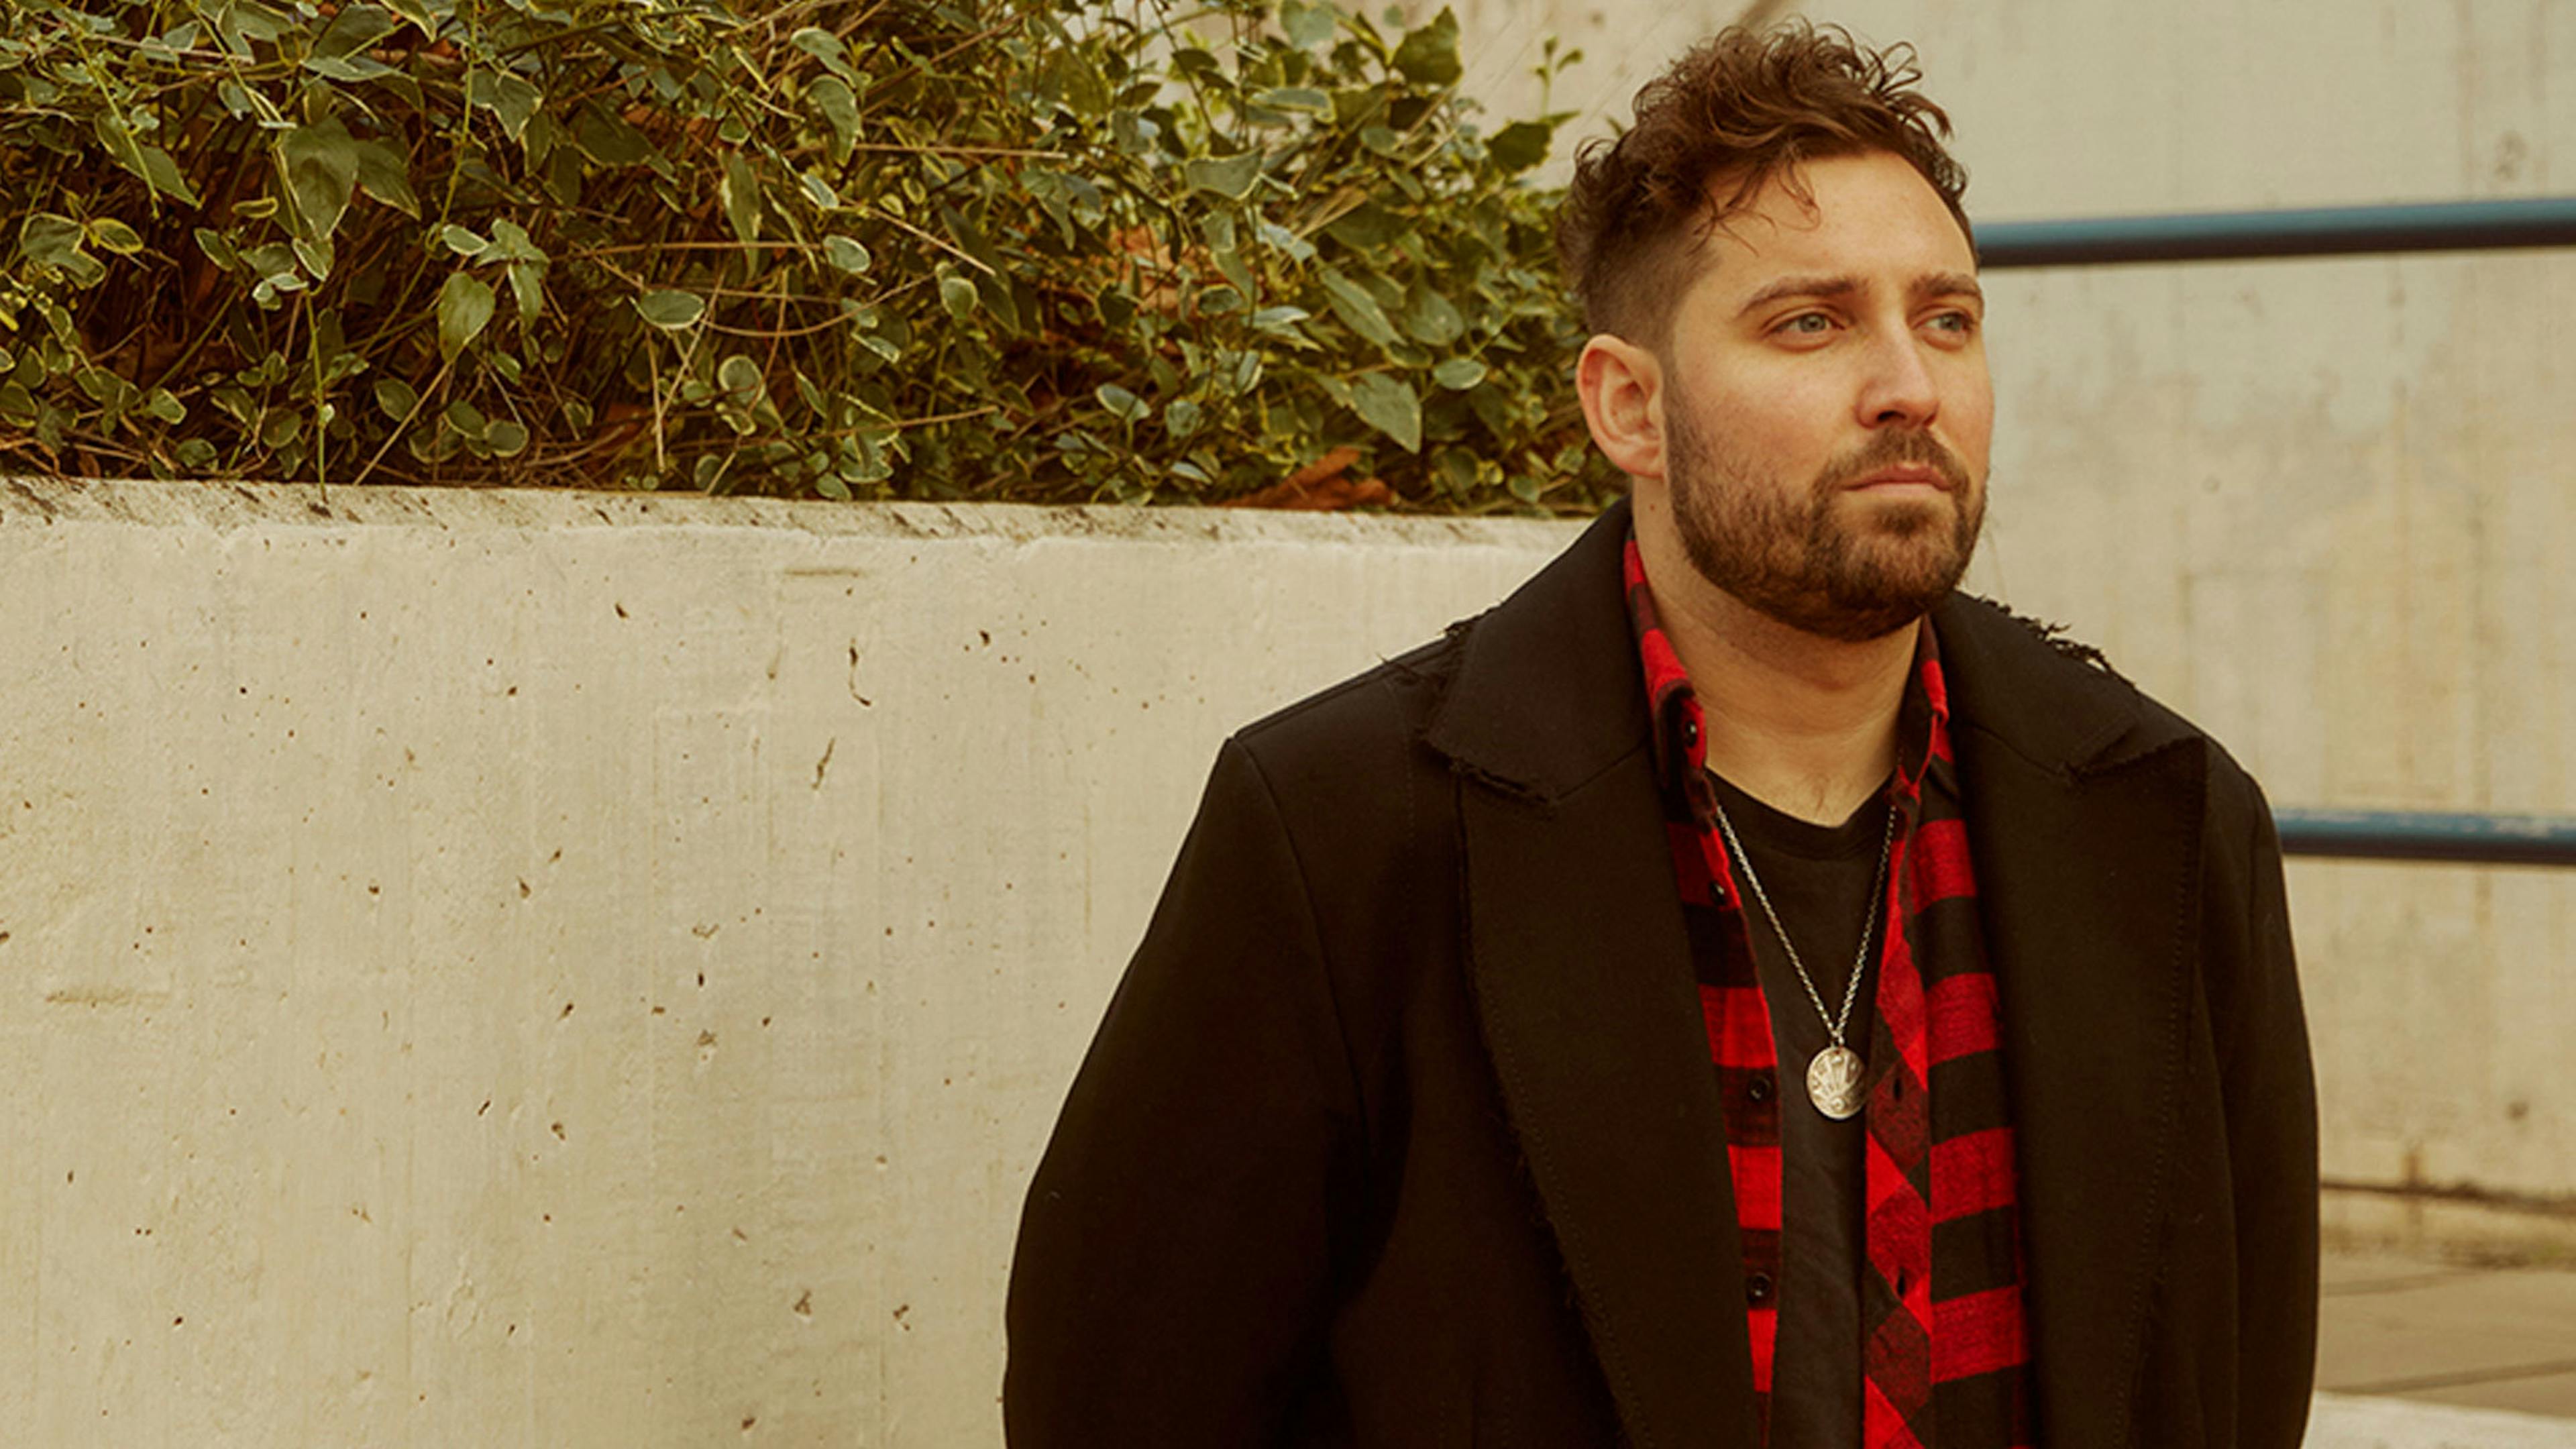 Tracksuit bottoms, Nando’s and falling off the stage: Life on the road with Josh Franceschi